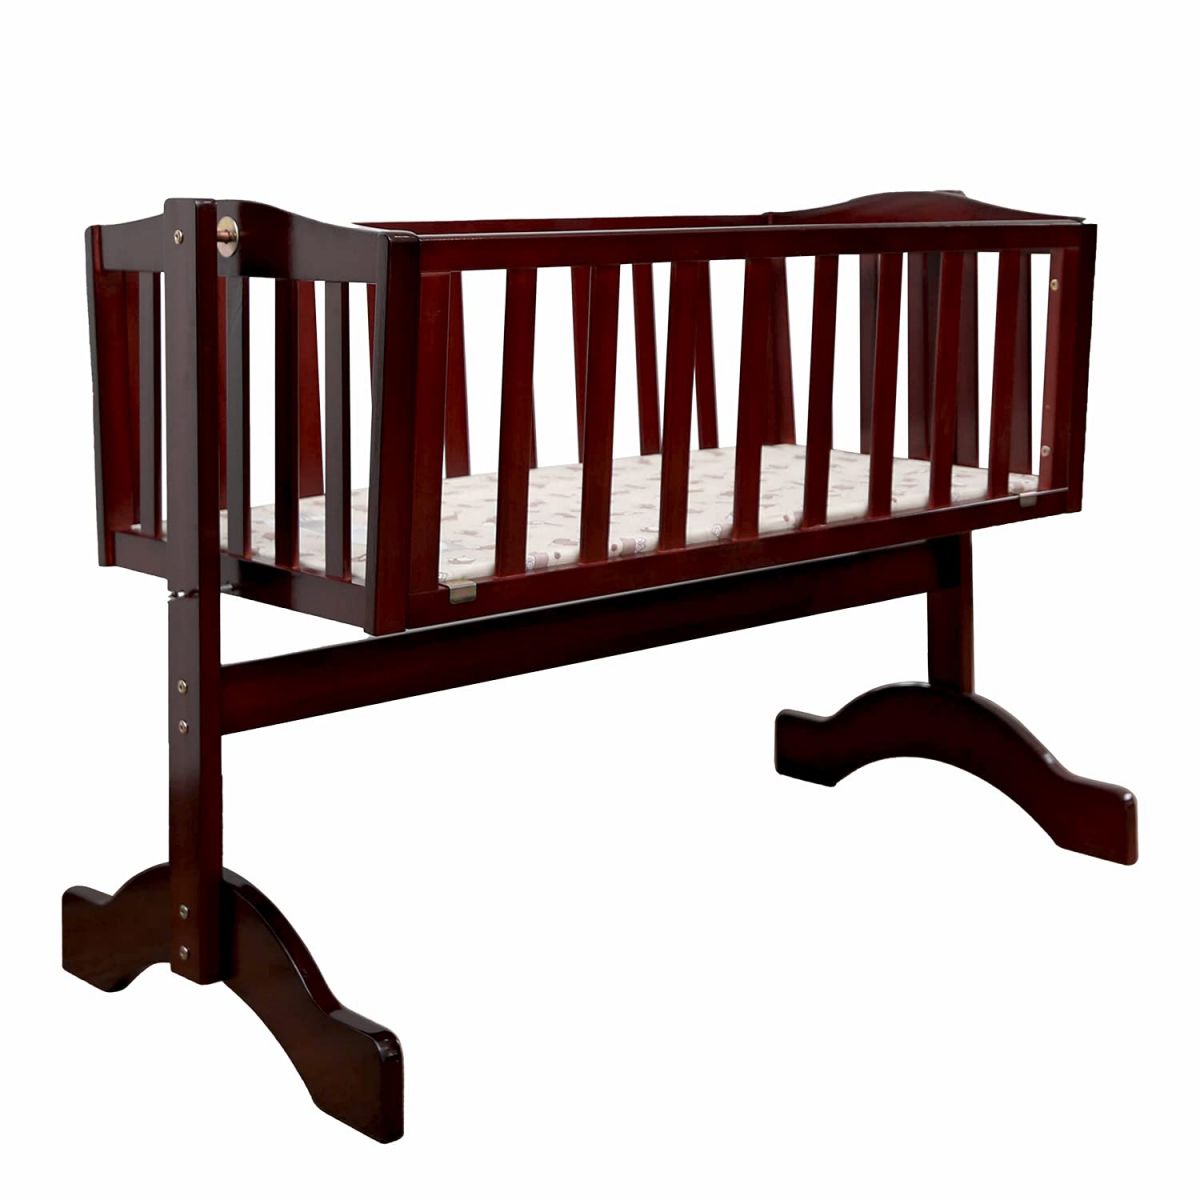 LuvLap Baby Wooden Cot C-10, Cherry Red